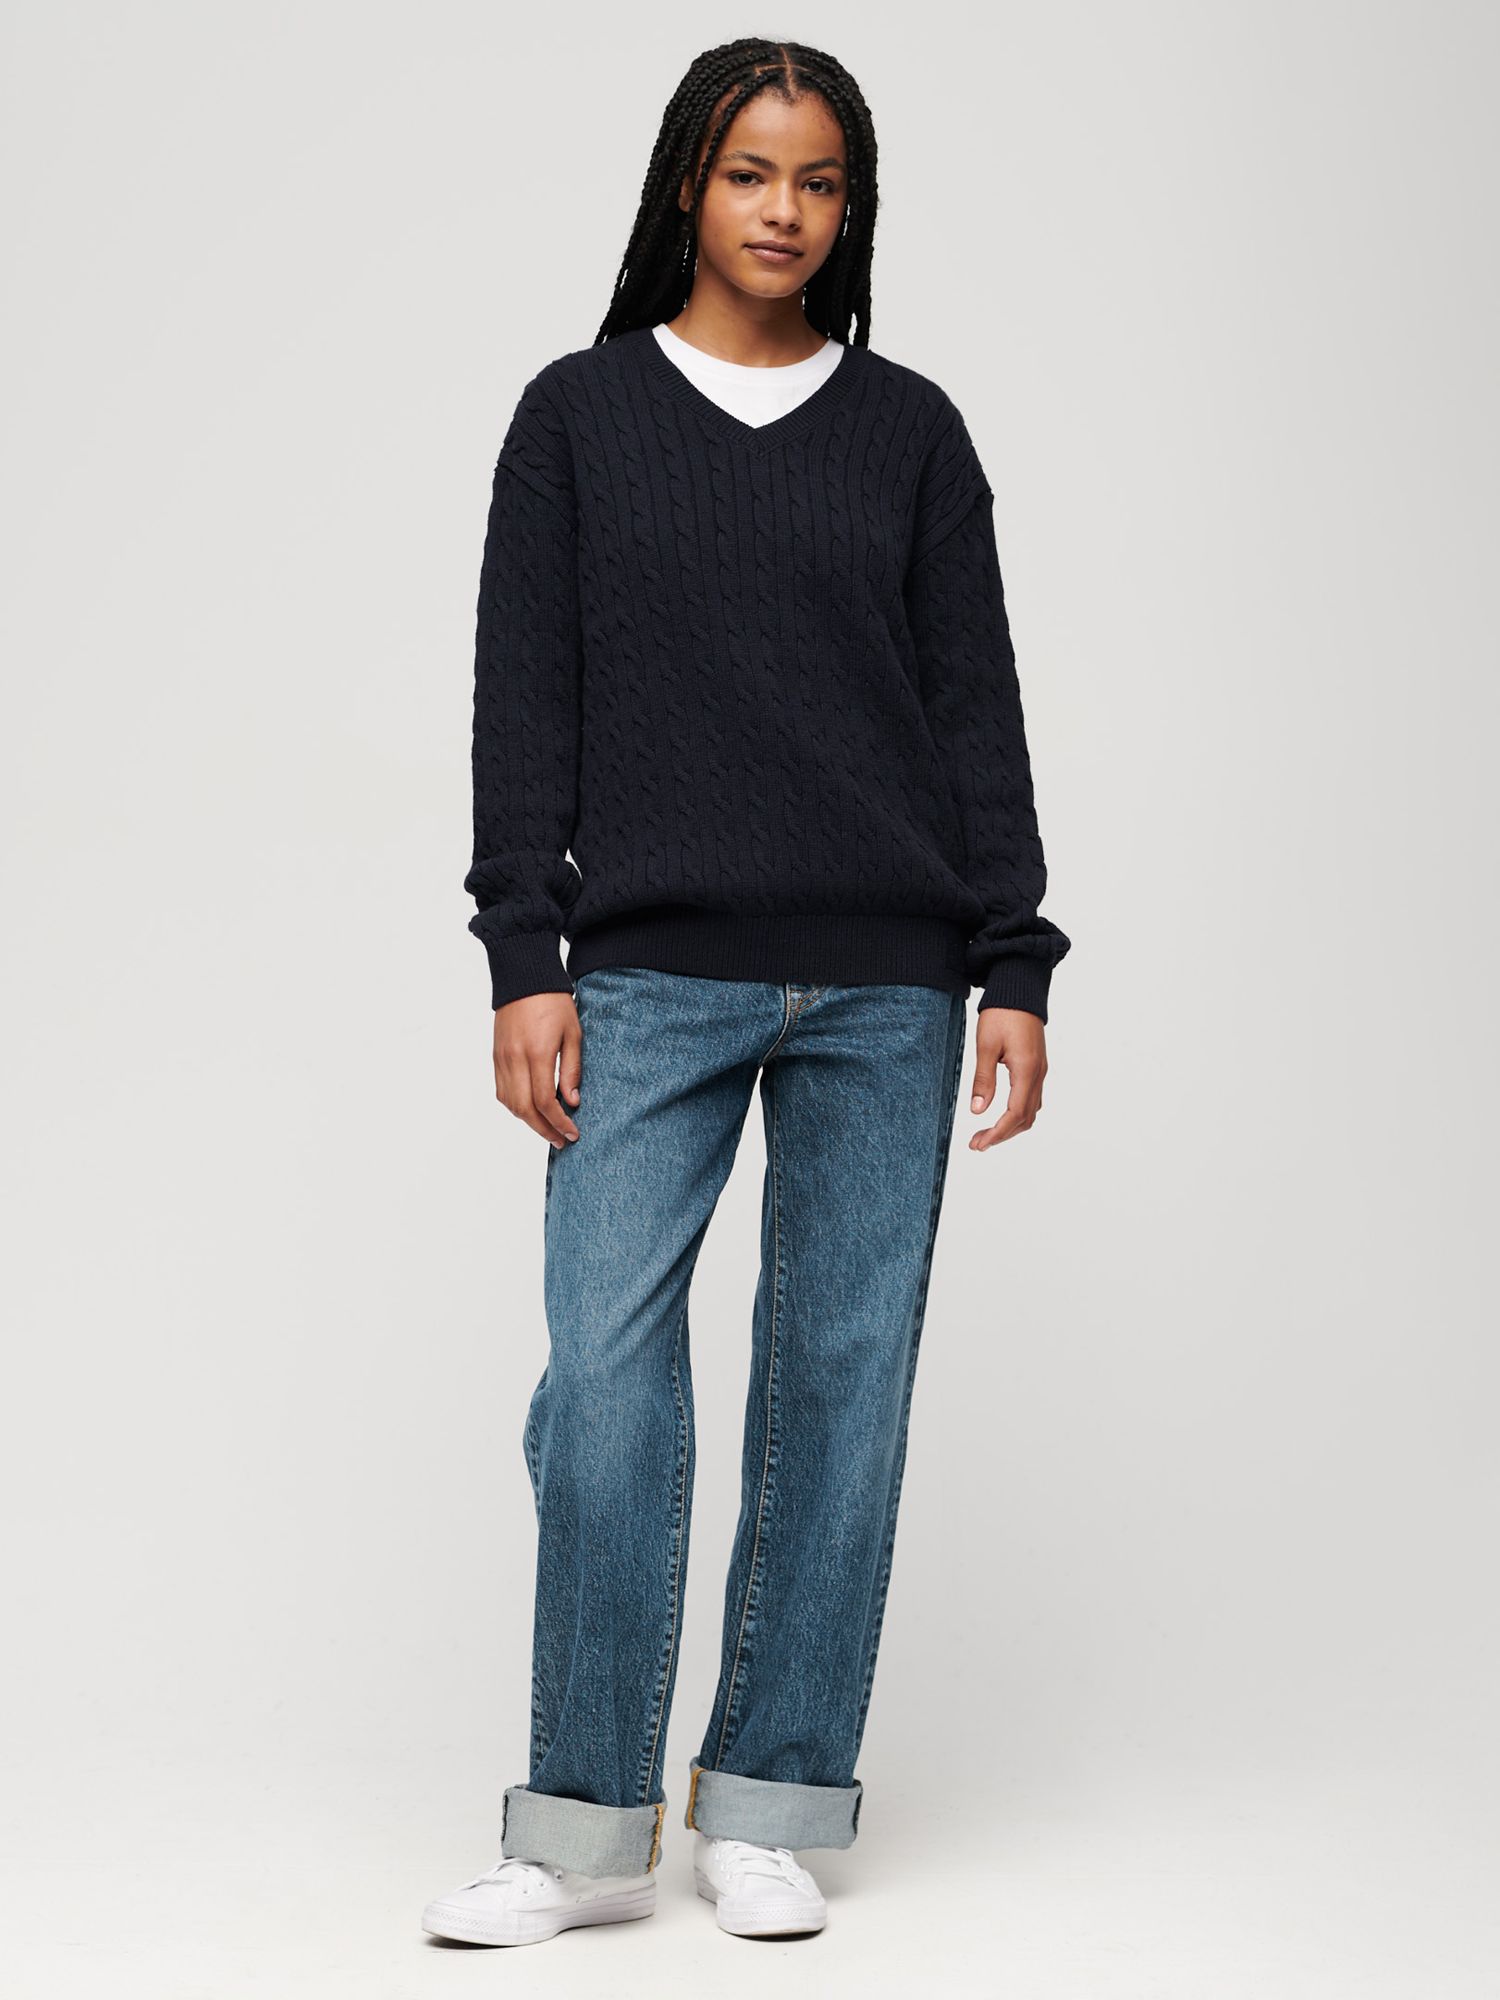 Superdry Oversized Cable Knit Jumper, Eclipse Navy at John Lewis & Partners